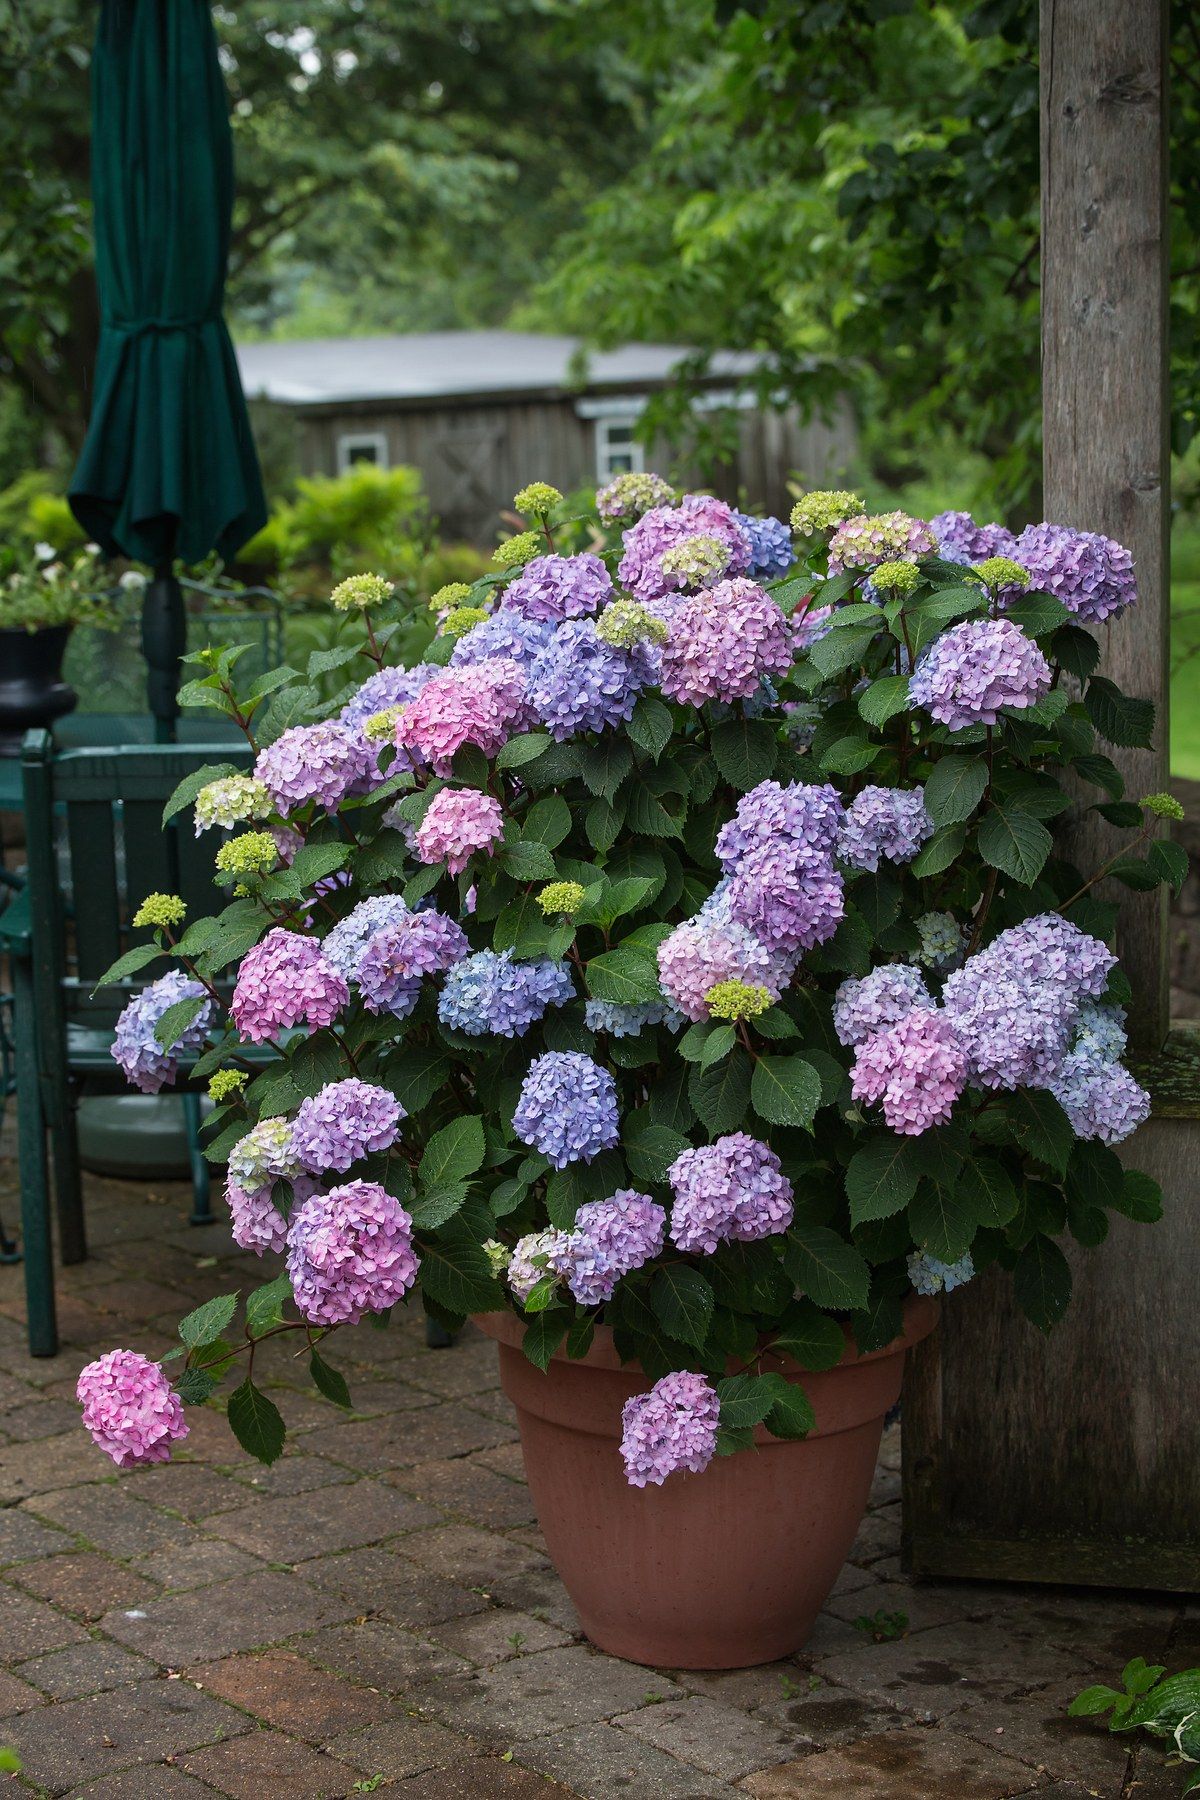 Potted Plants Outdoor “The Ultimate Guide to Potted Plants for Outdoor Spaces”